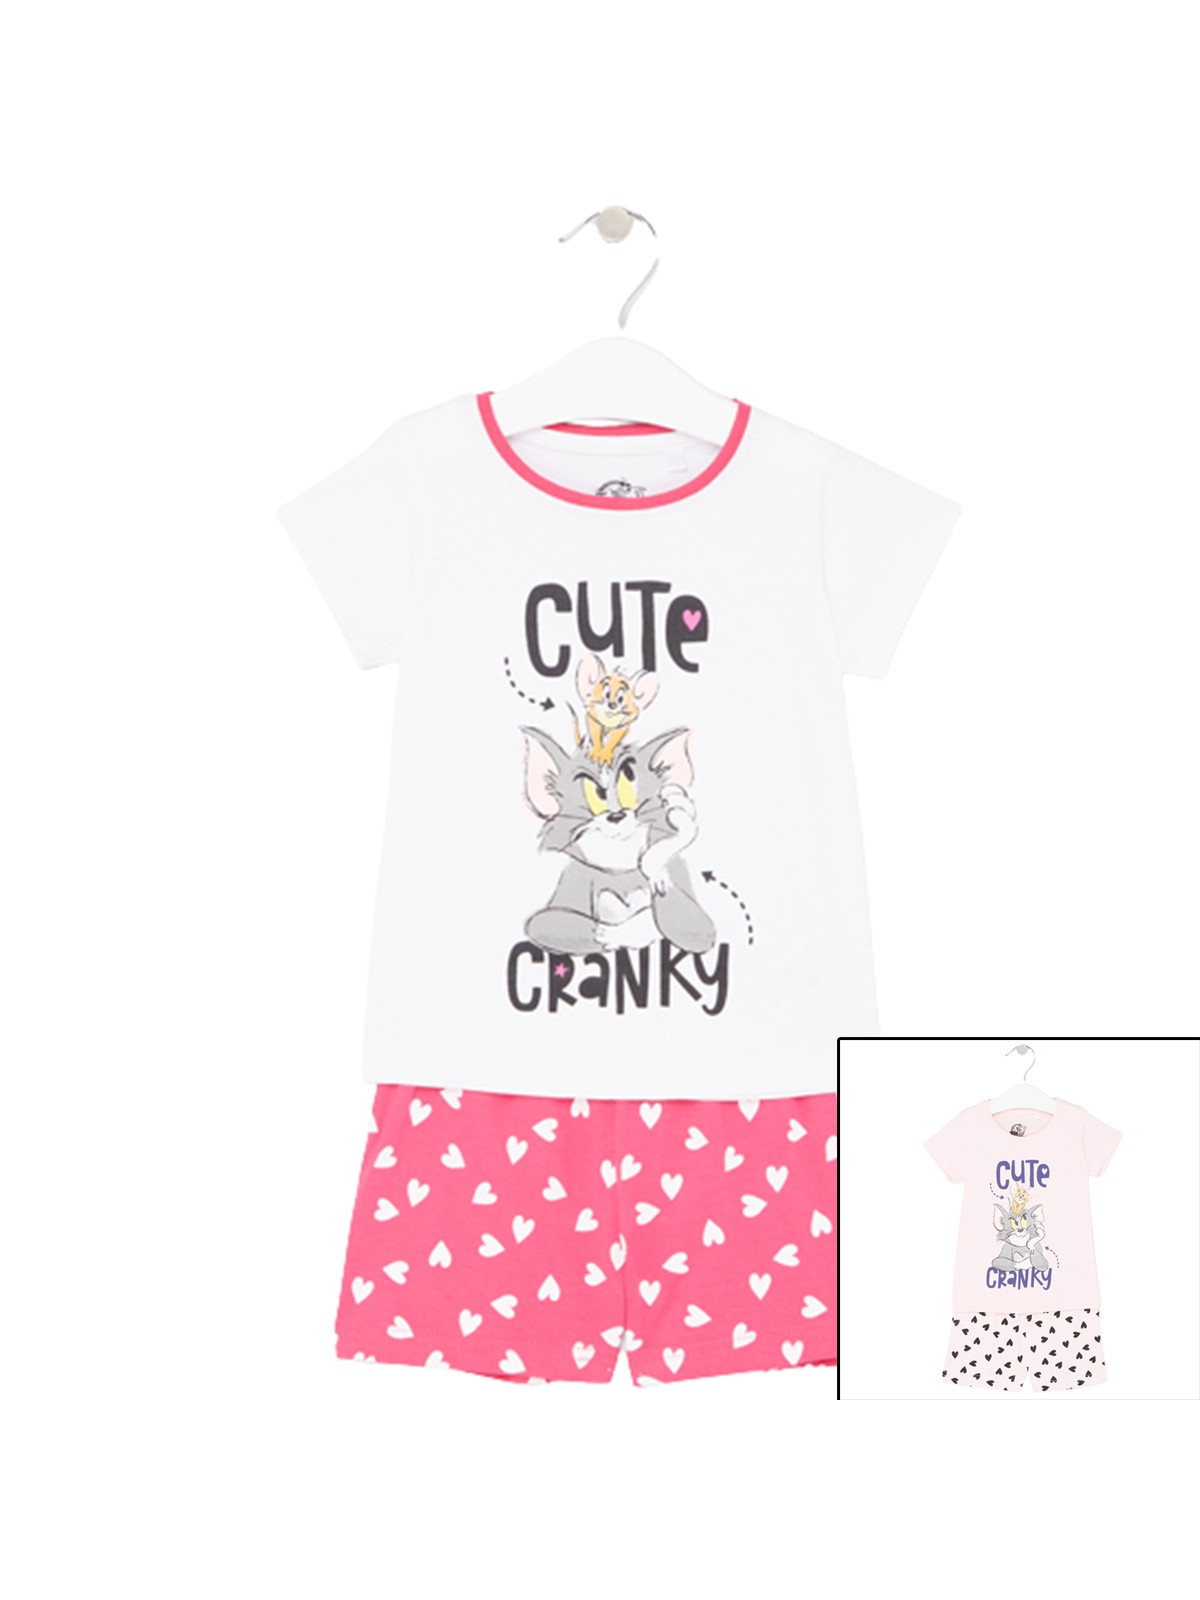 Tom et Jerry Clothing of 2 pieces